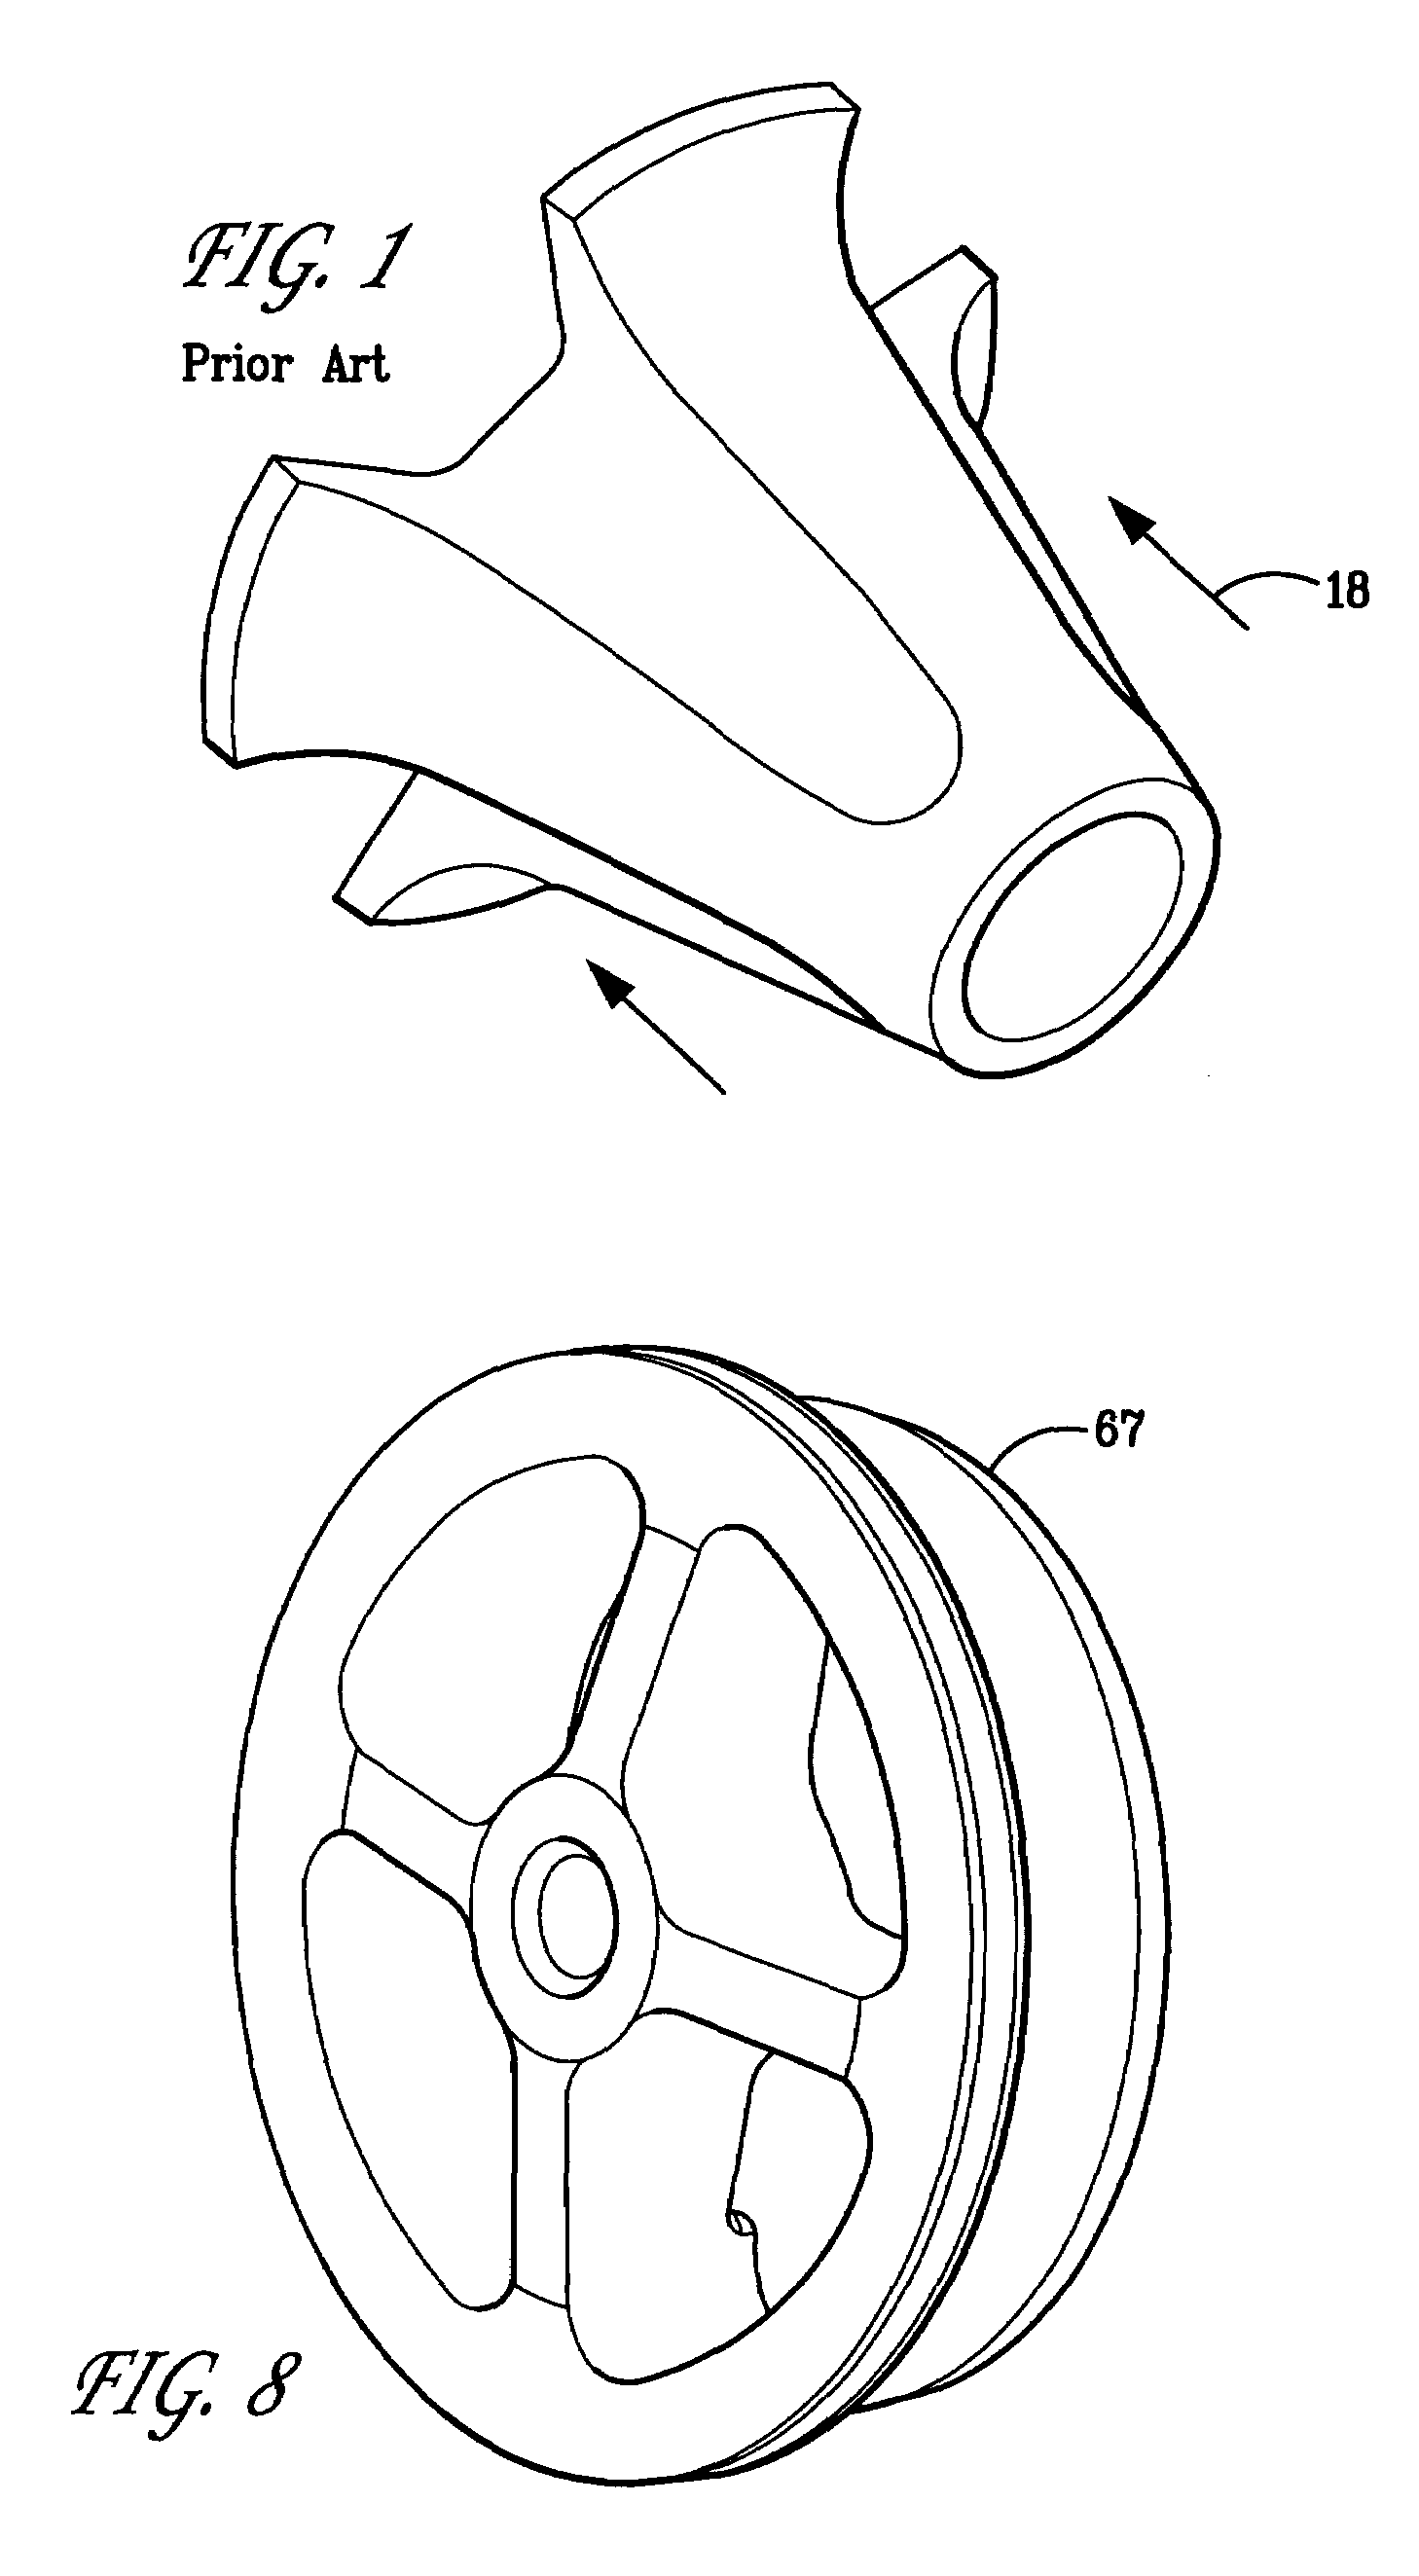 Rotary pulser for transmitting information to the surface from a drill string down hole in a well